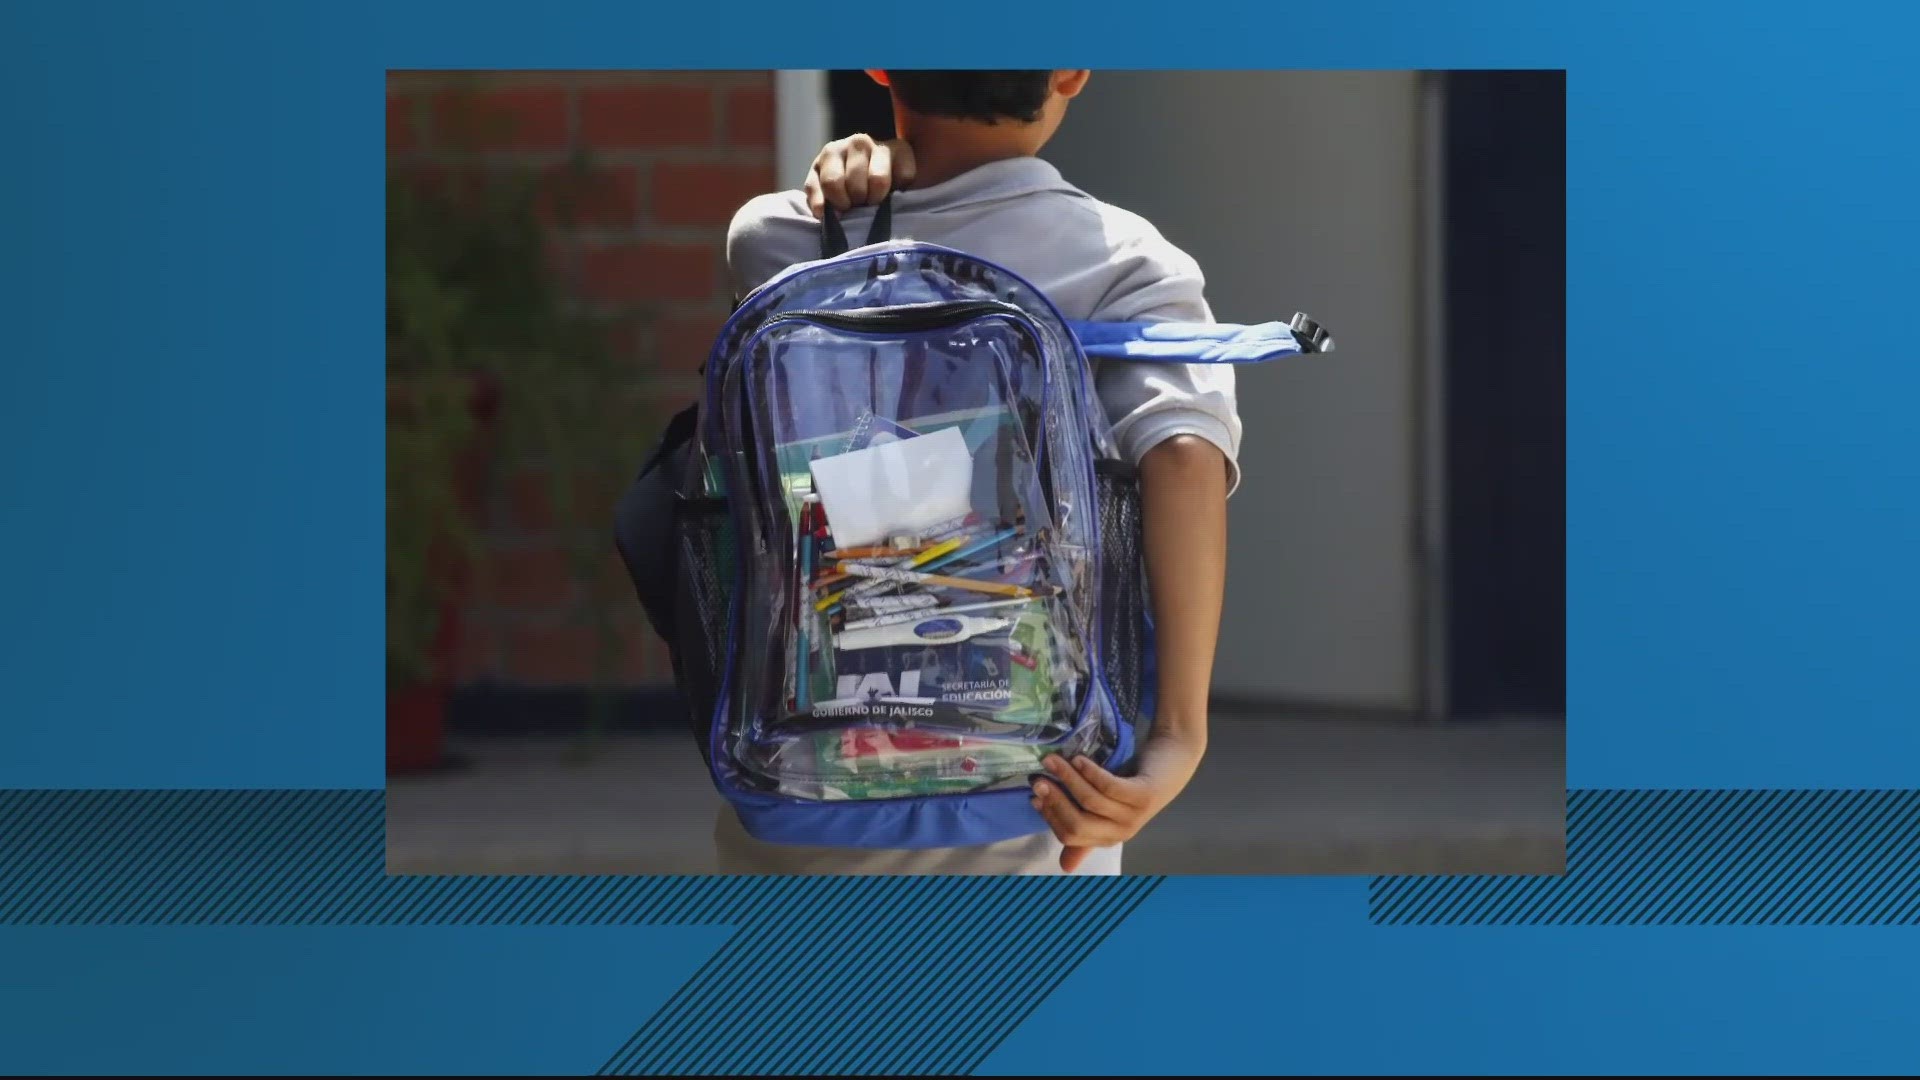 The school system is installing metal detectors and opting for clear backpacks.